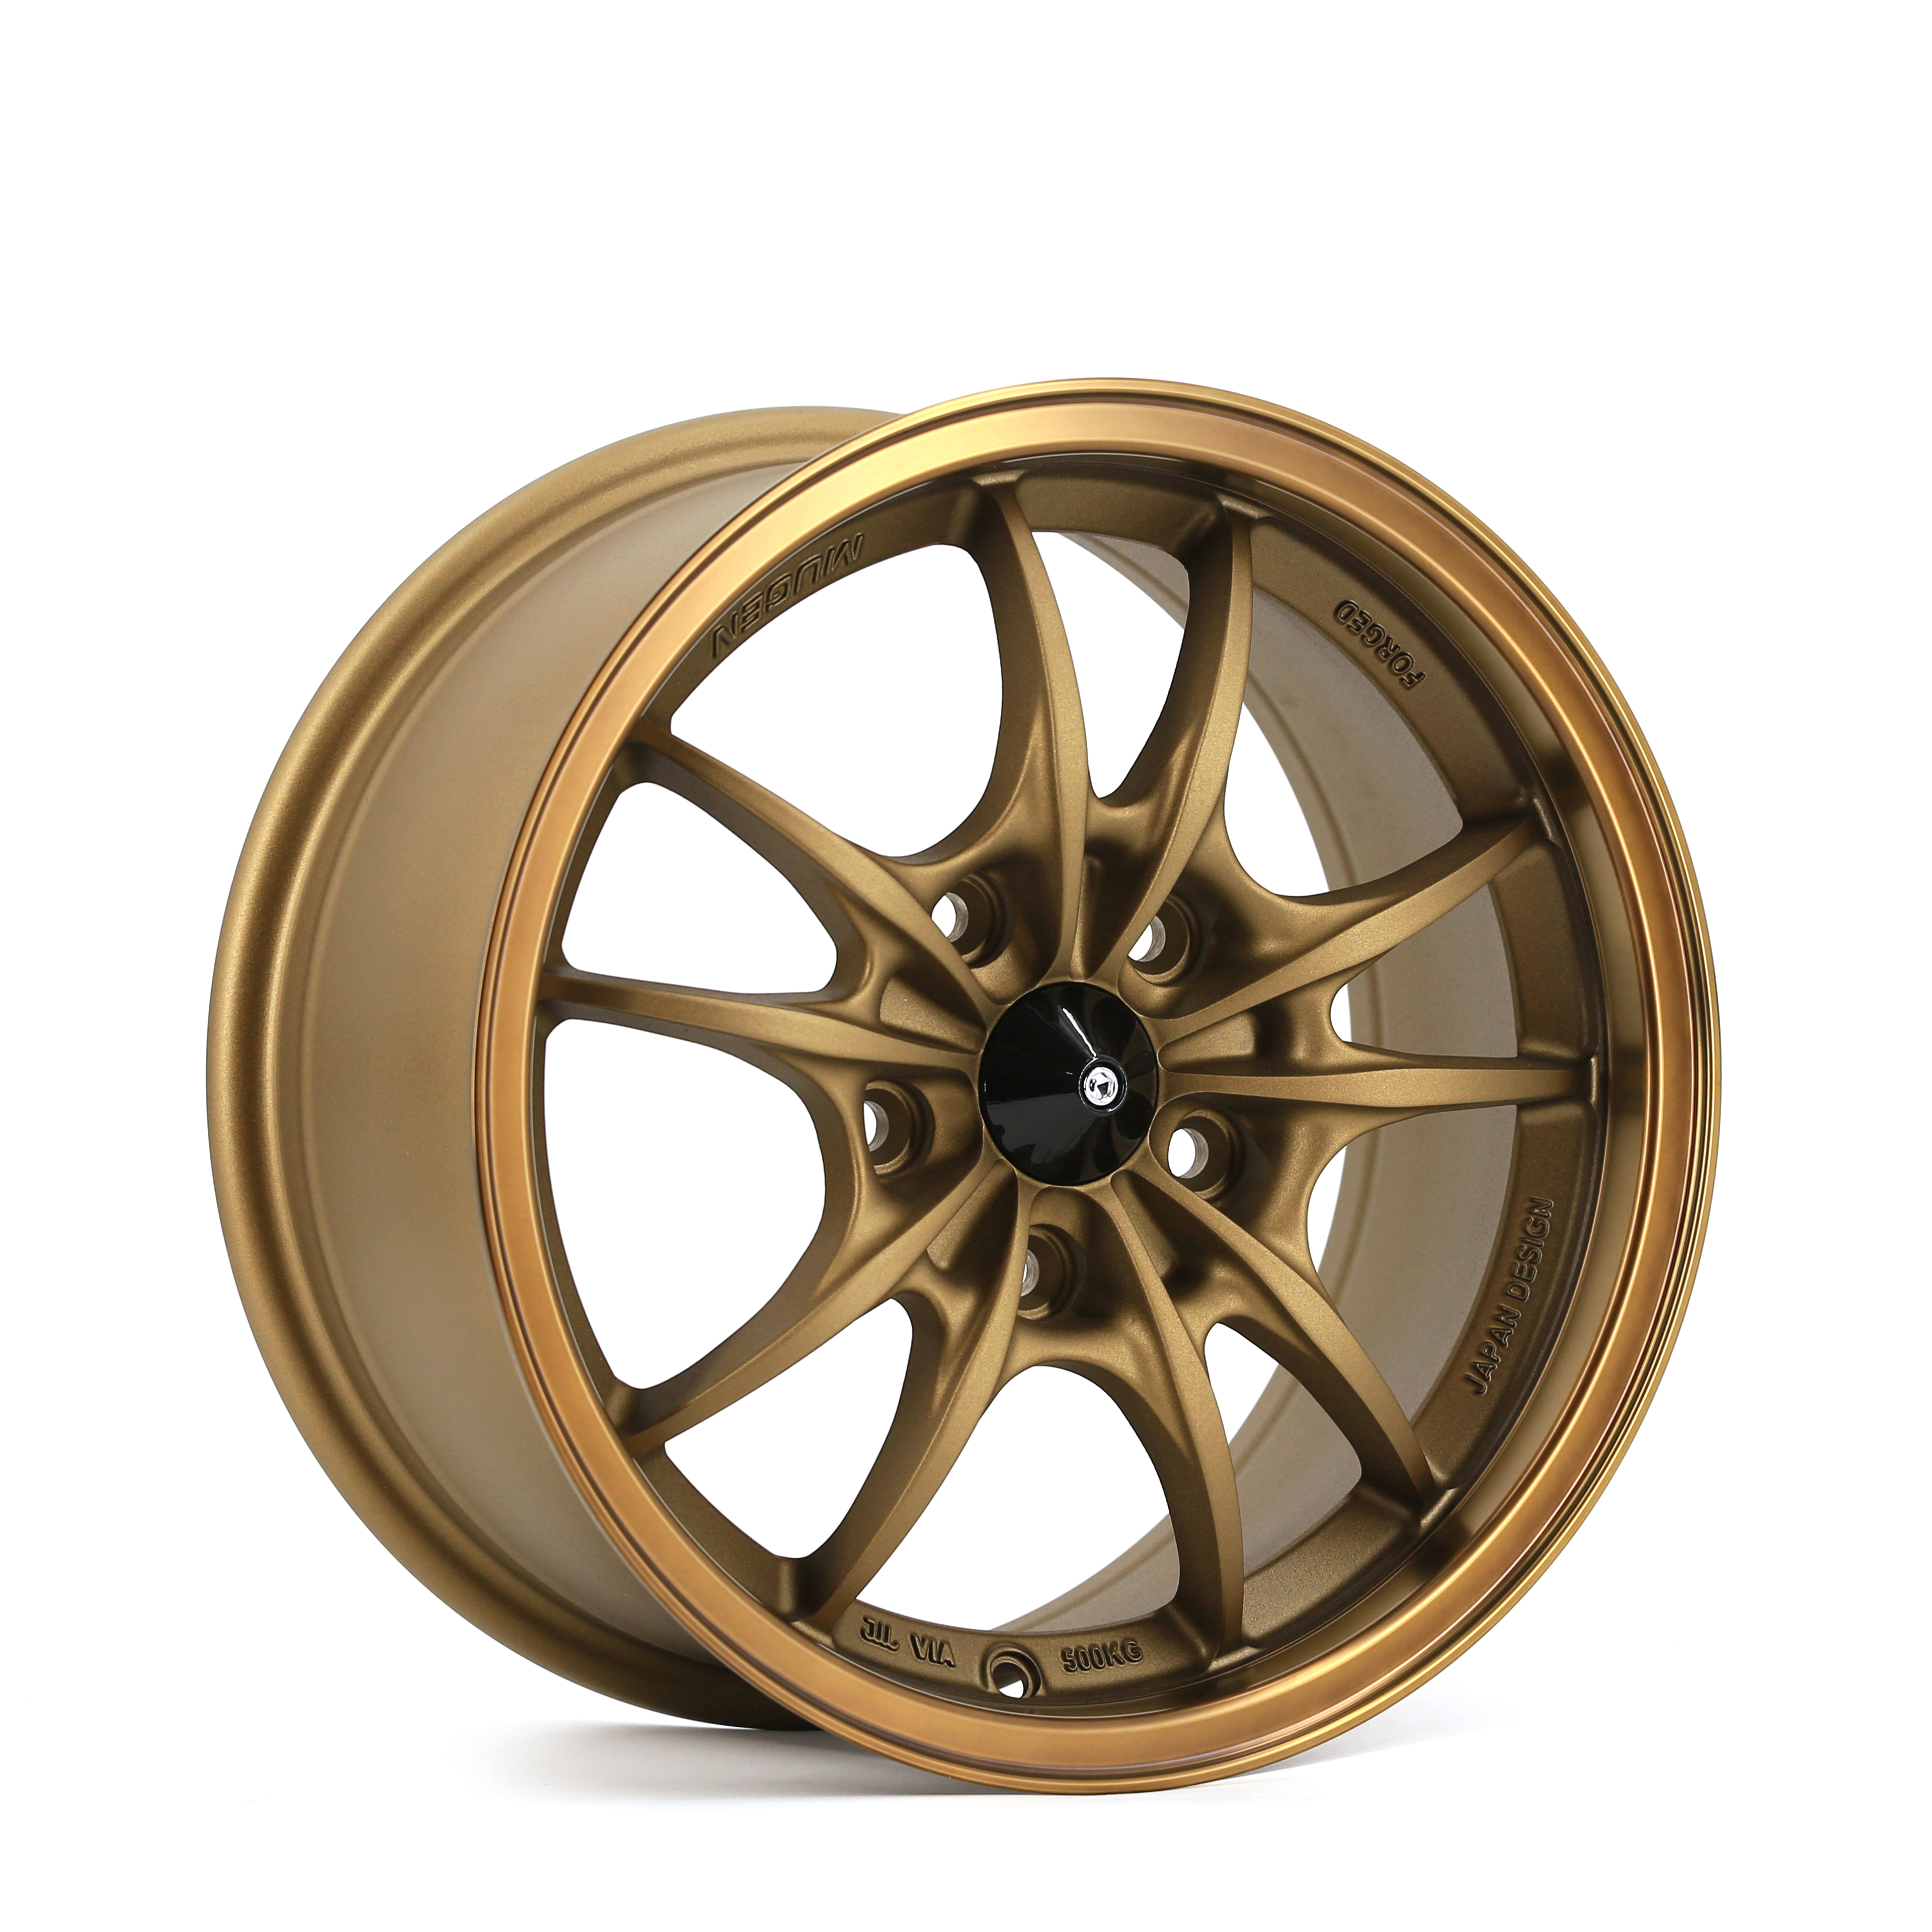 Chinese Professional Incubus Alloy Rims - China Car Wheels Wholesale Rayone Design 677 Bronze Finish 15inch Wheels For Racing Car – Rayone